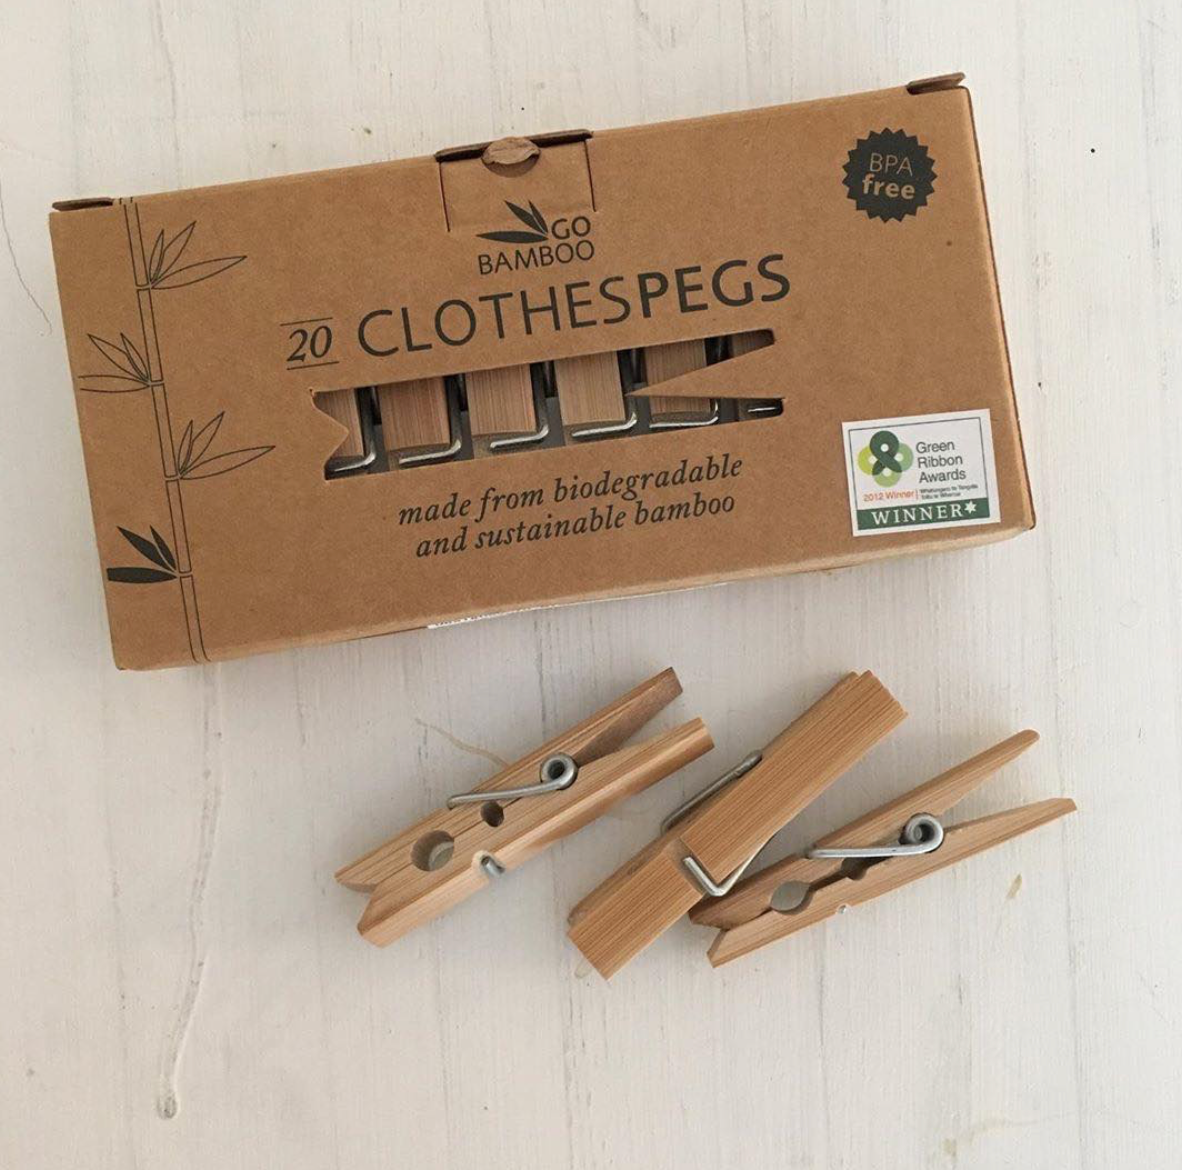 Bamboo Pegs by Go Bamboo